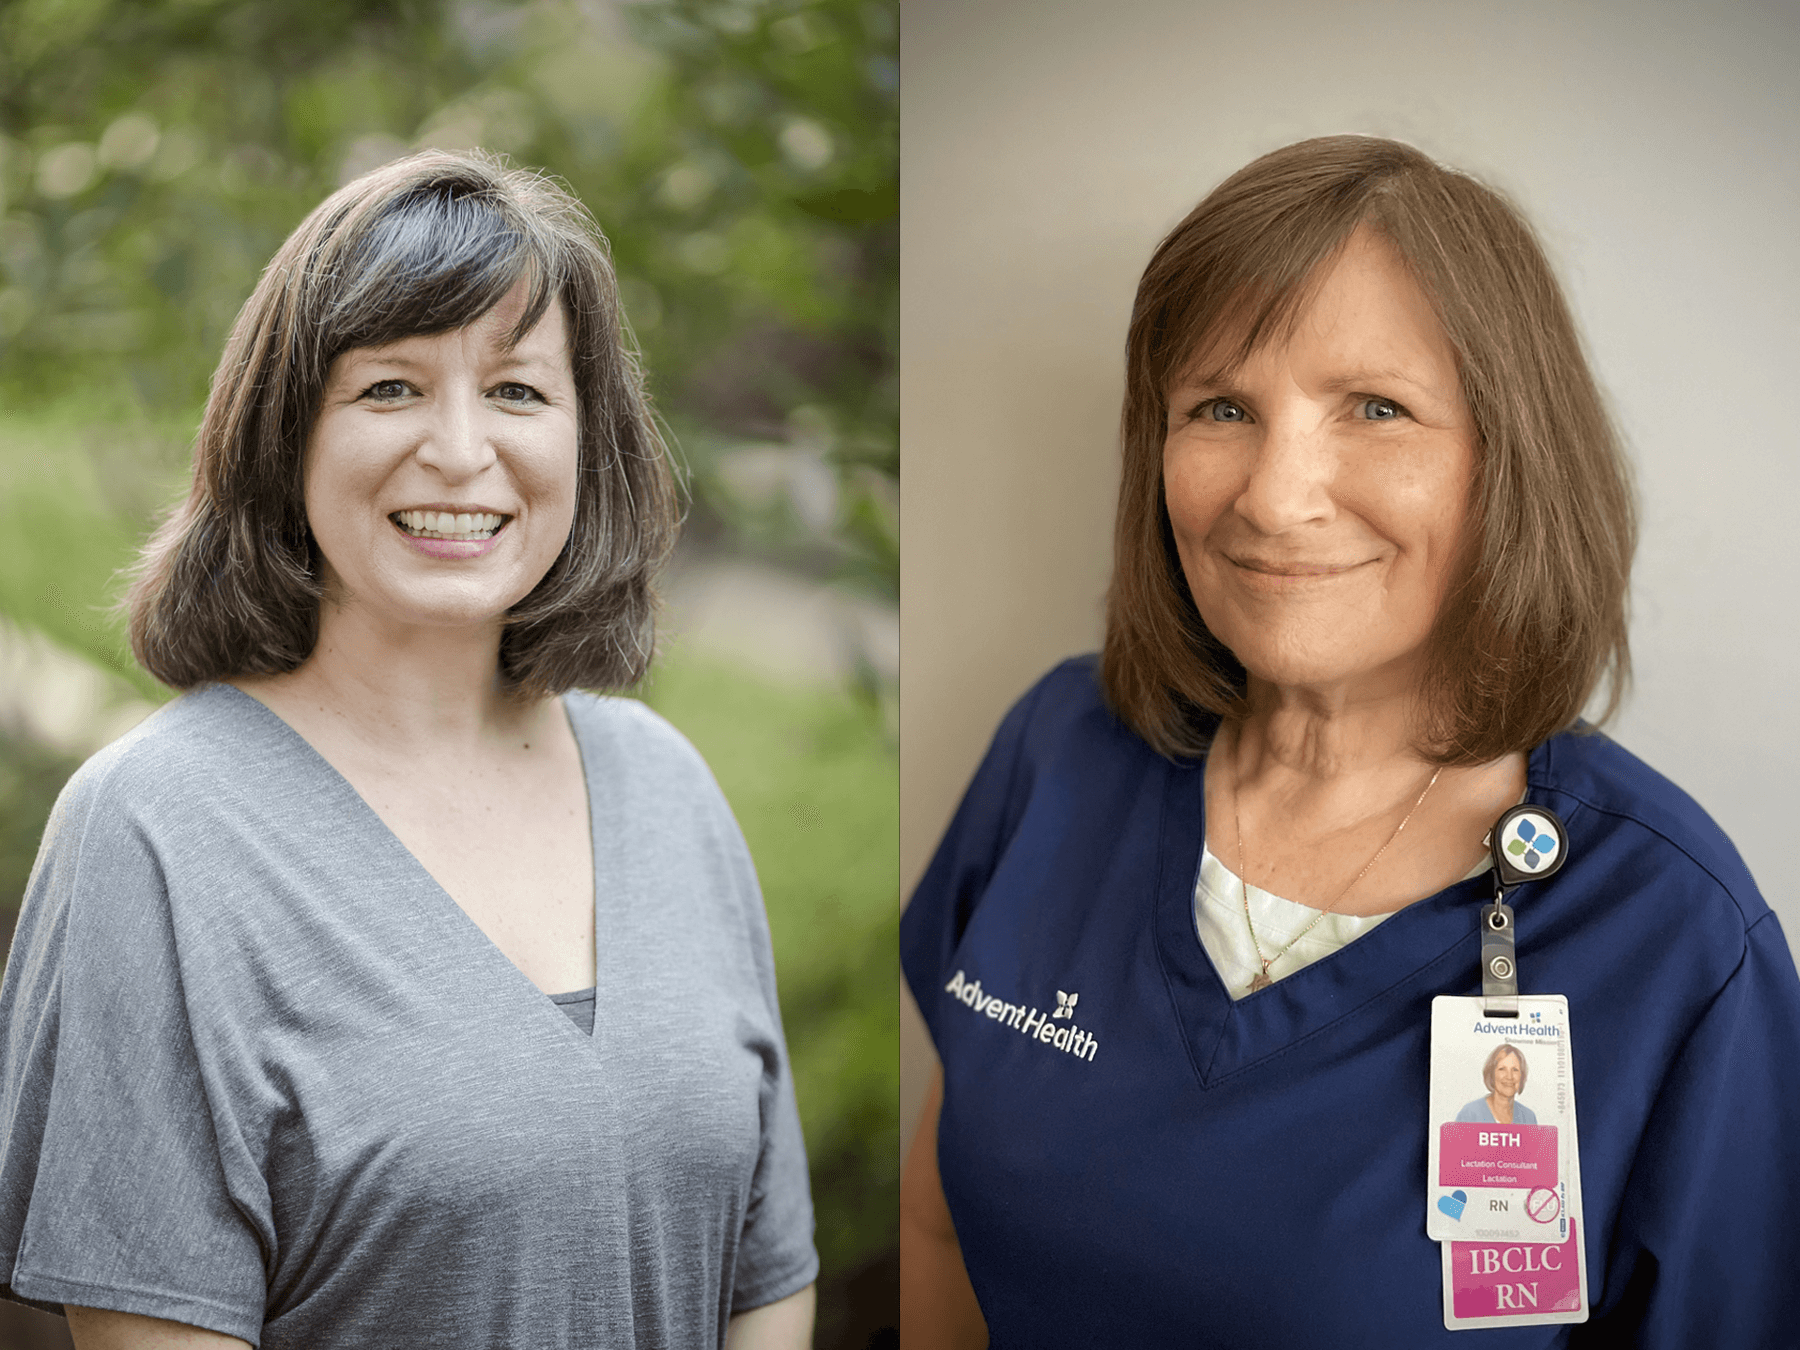 AdventHealth Shawnee Mission employees receive awards from The Research Foundation